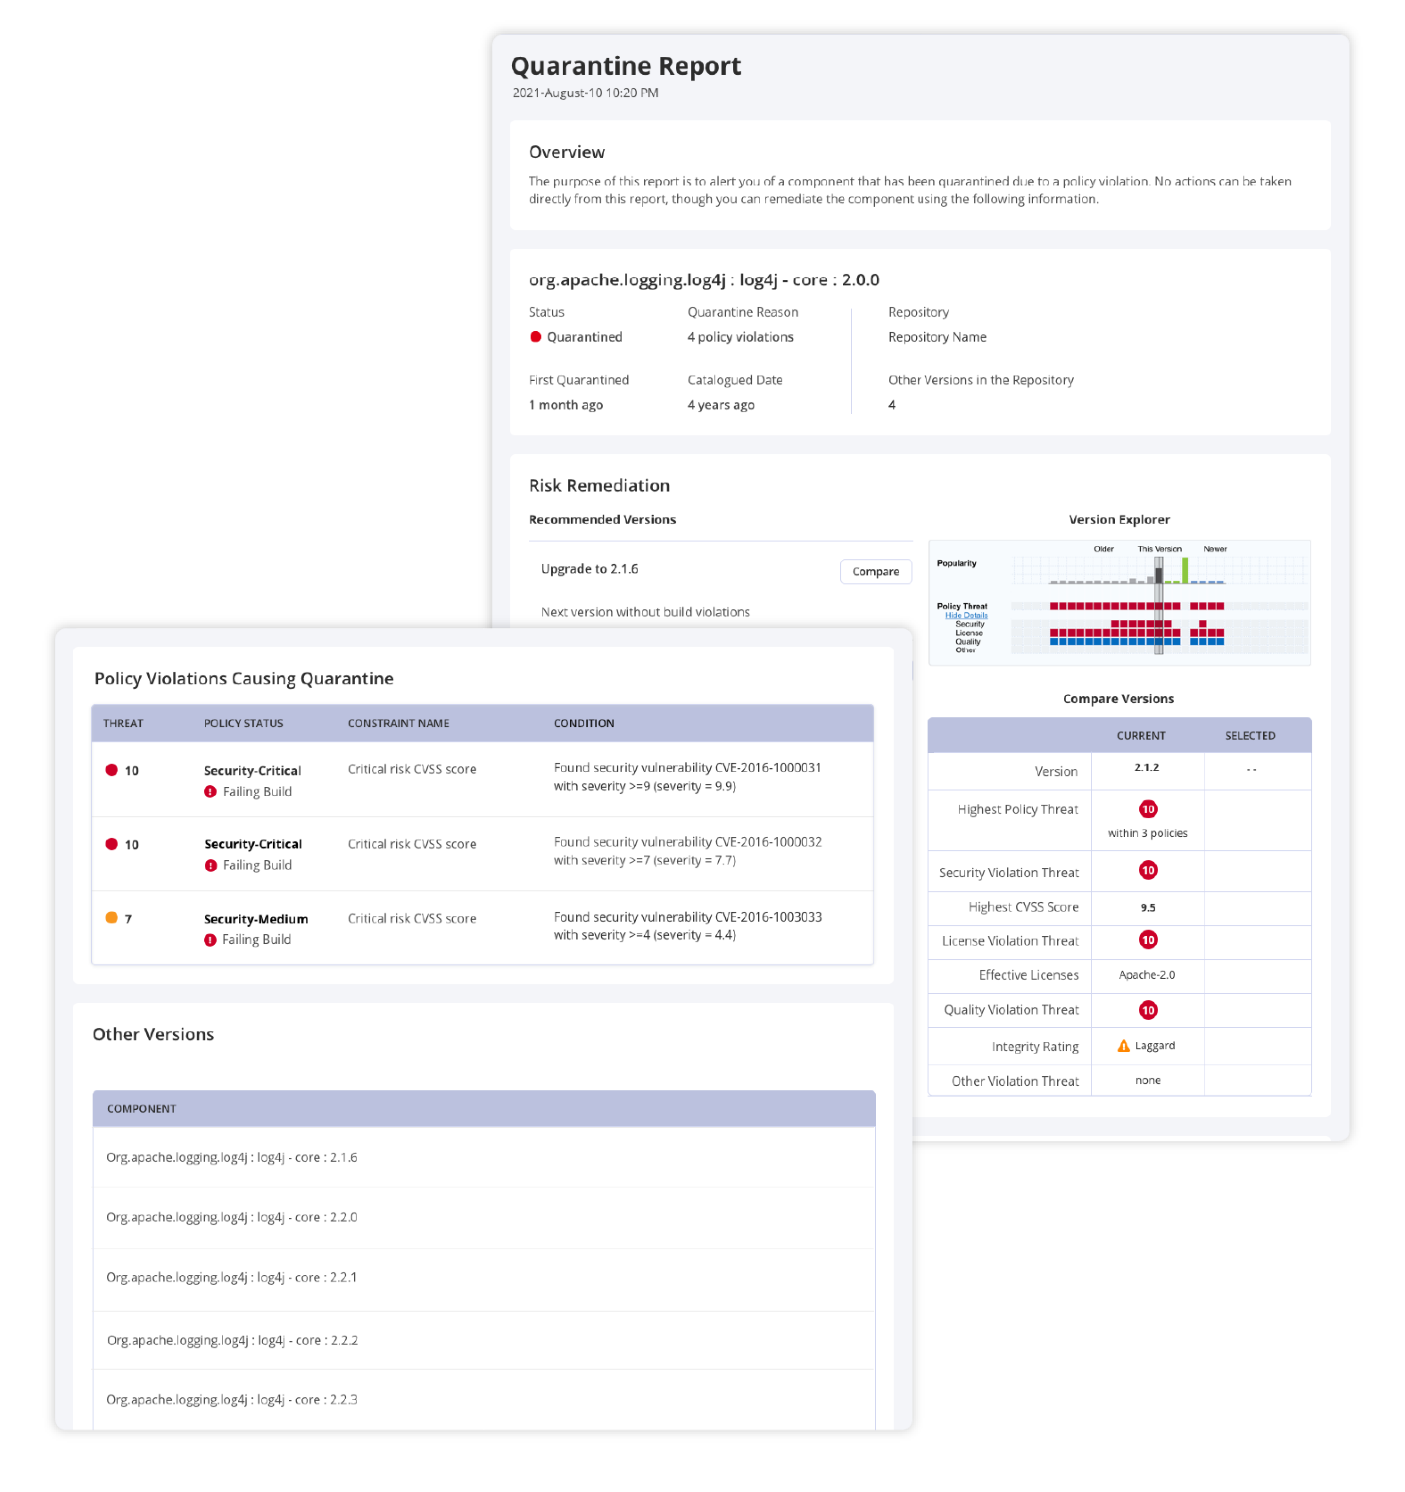 View of of the available Quarantine Report in the Anonymous Developer View